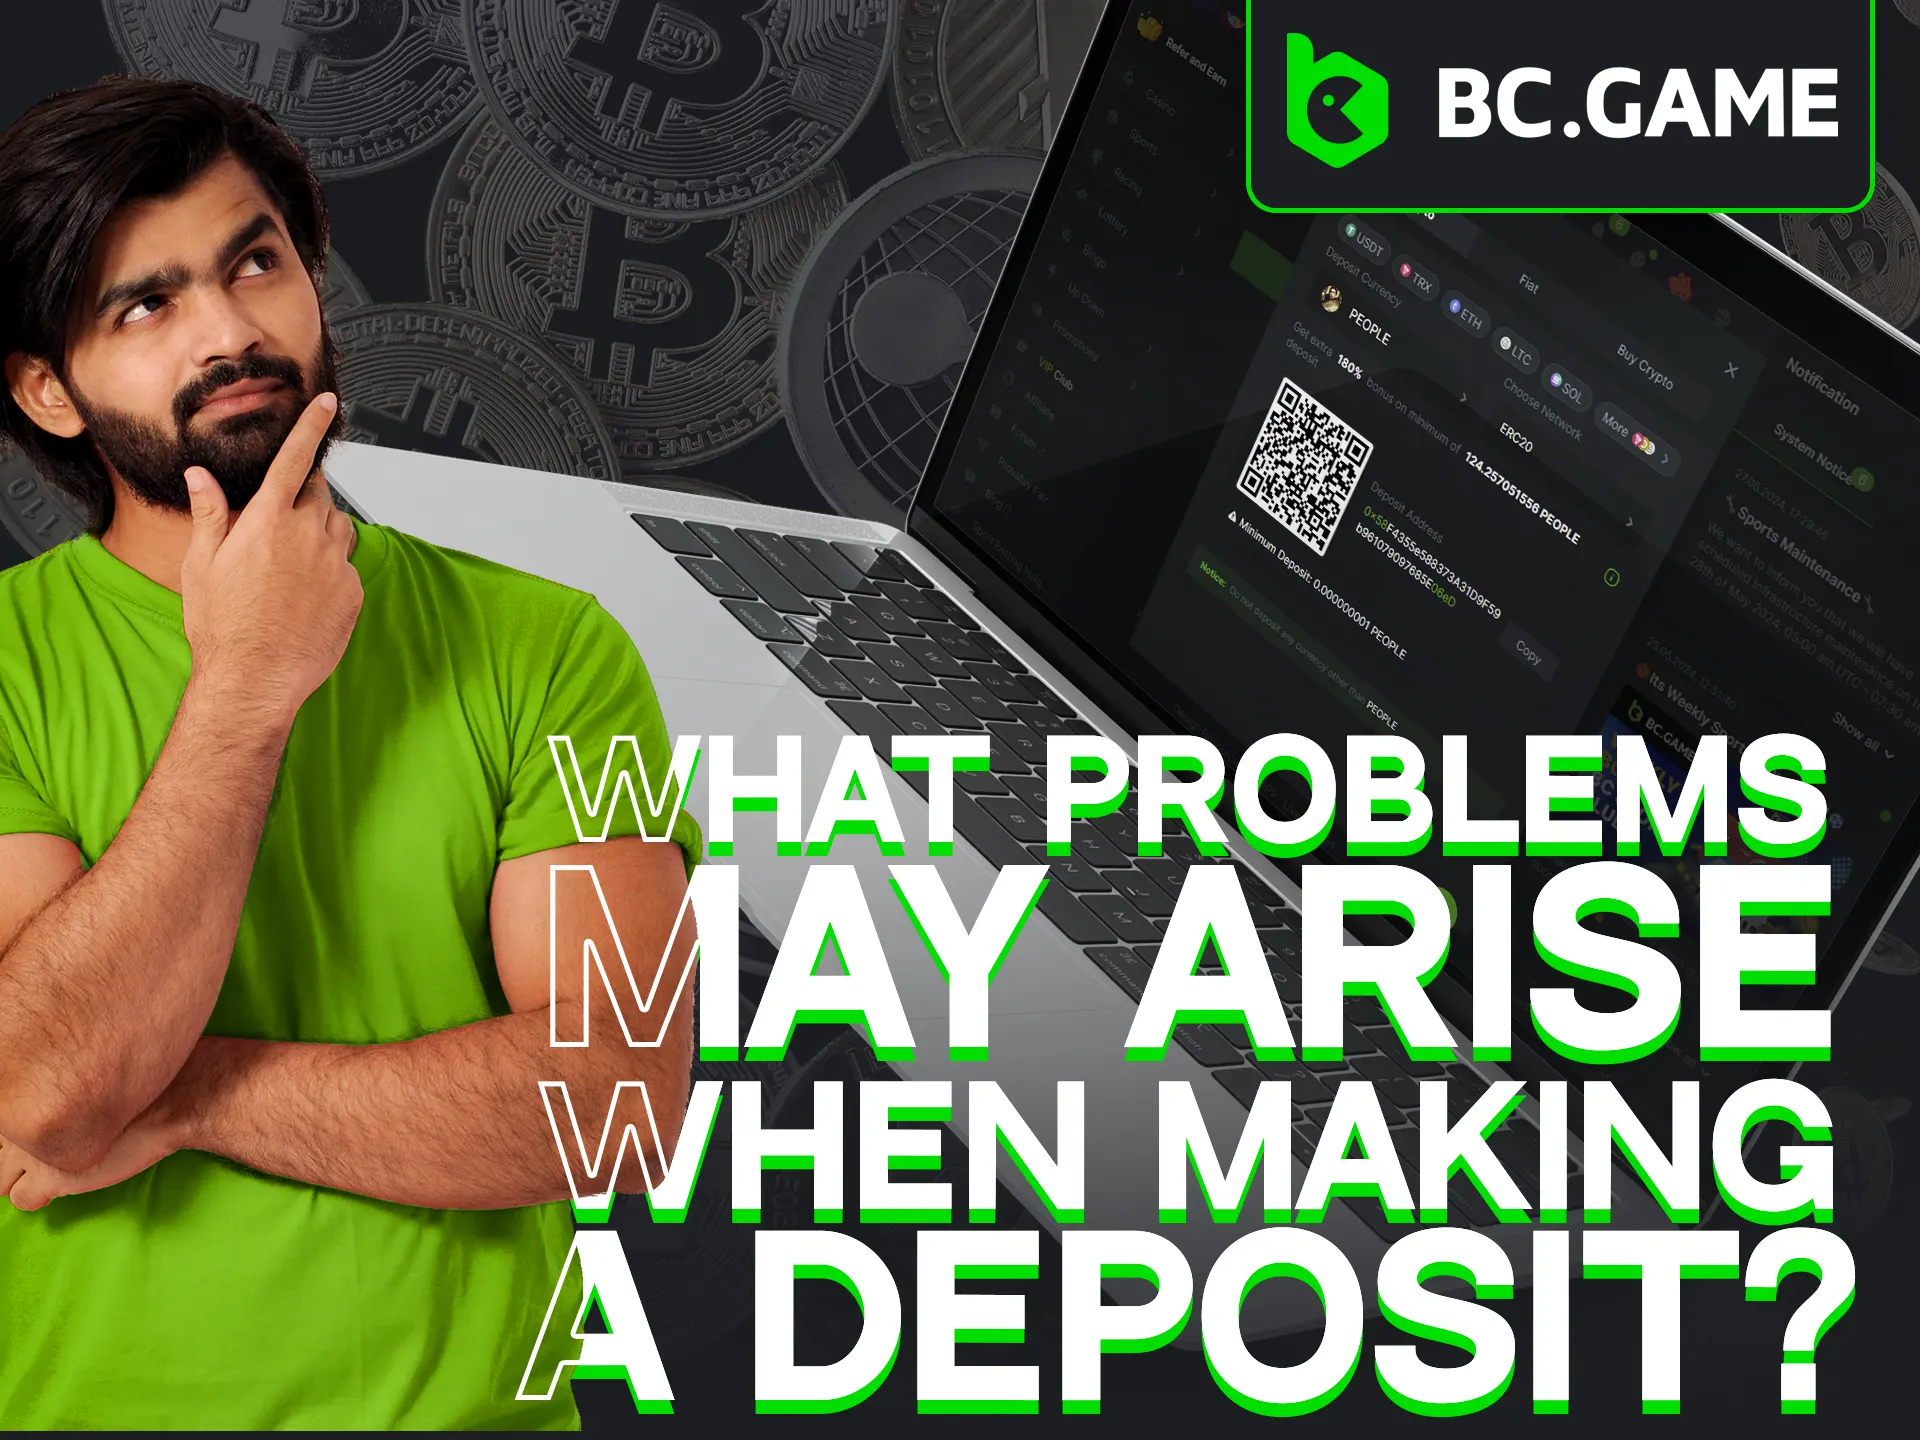 Learn about potential problems with deposit at BC Game.